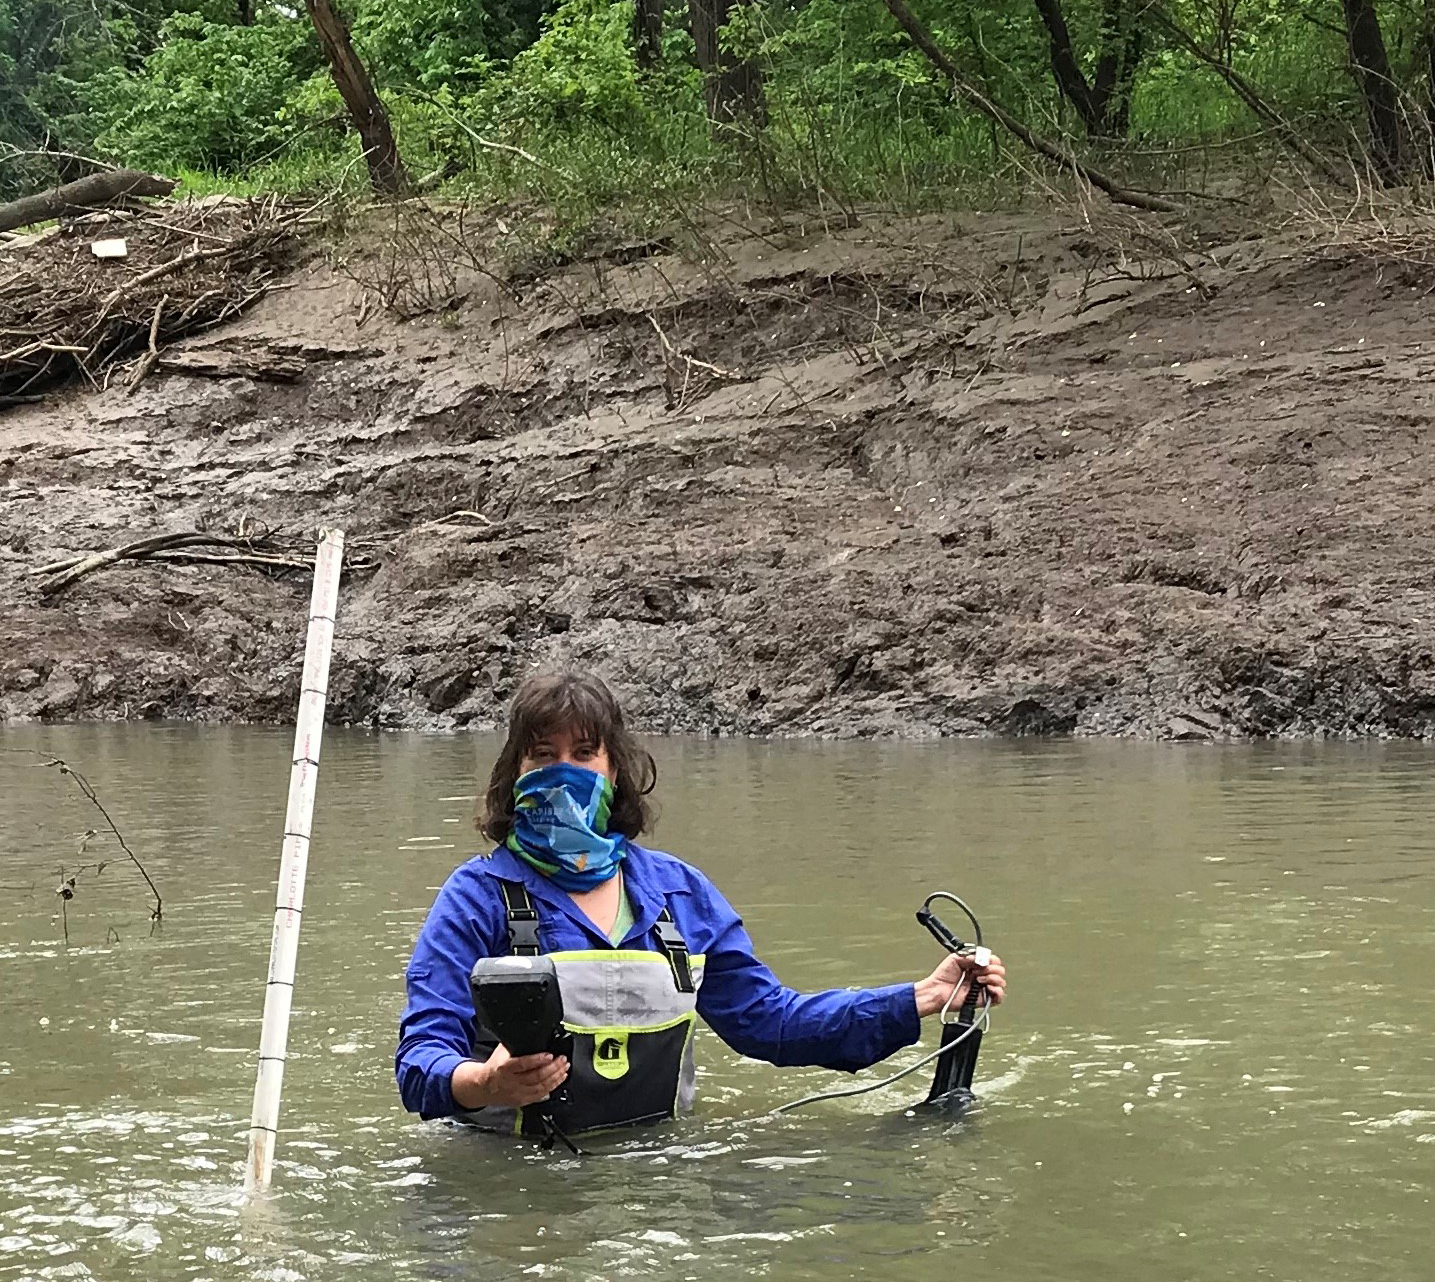 "Debbie Baker wearing waders and walking in waist-up water in river, holding research equipment"